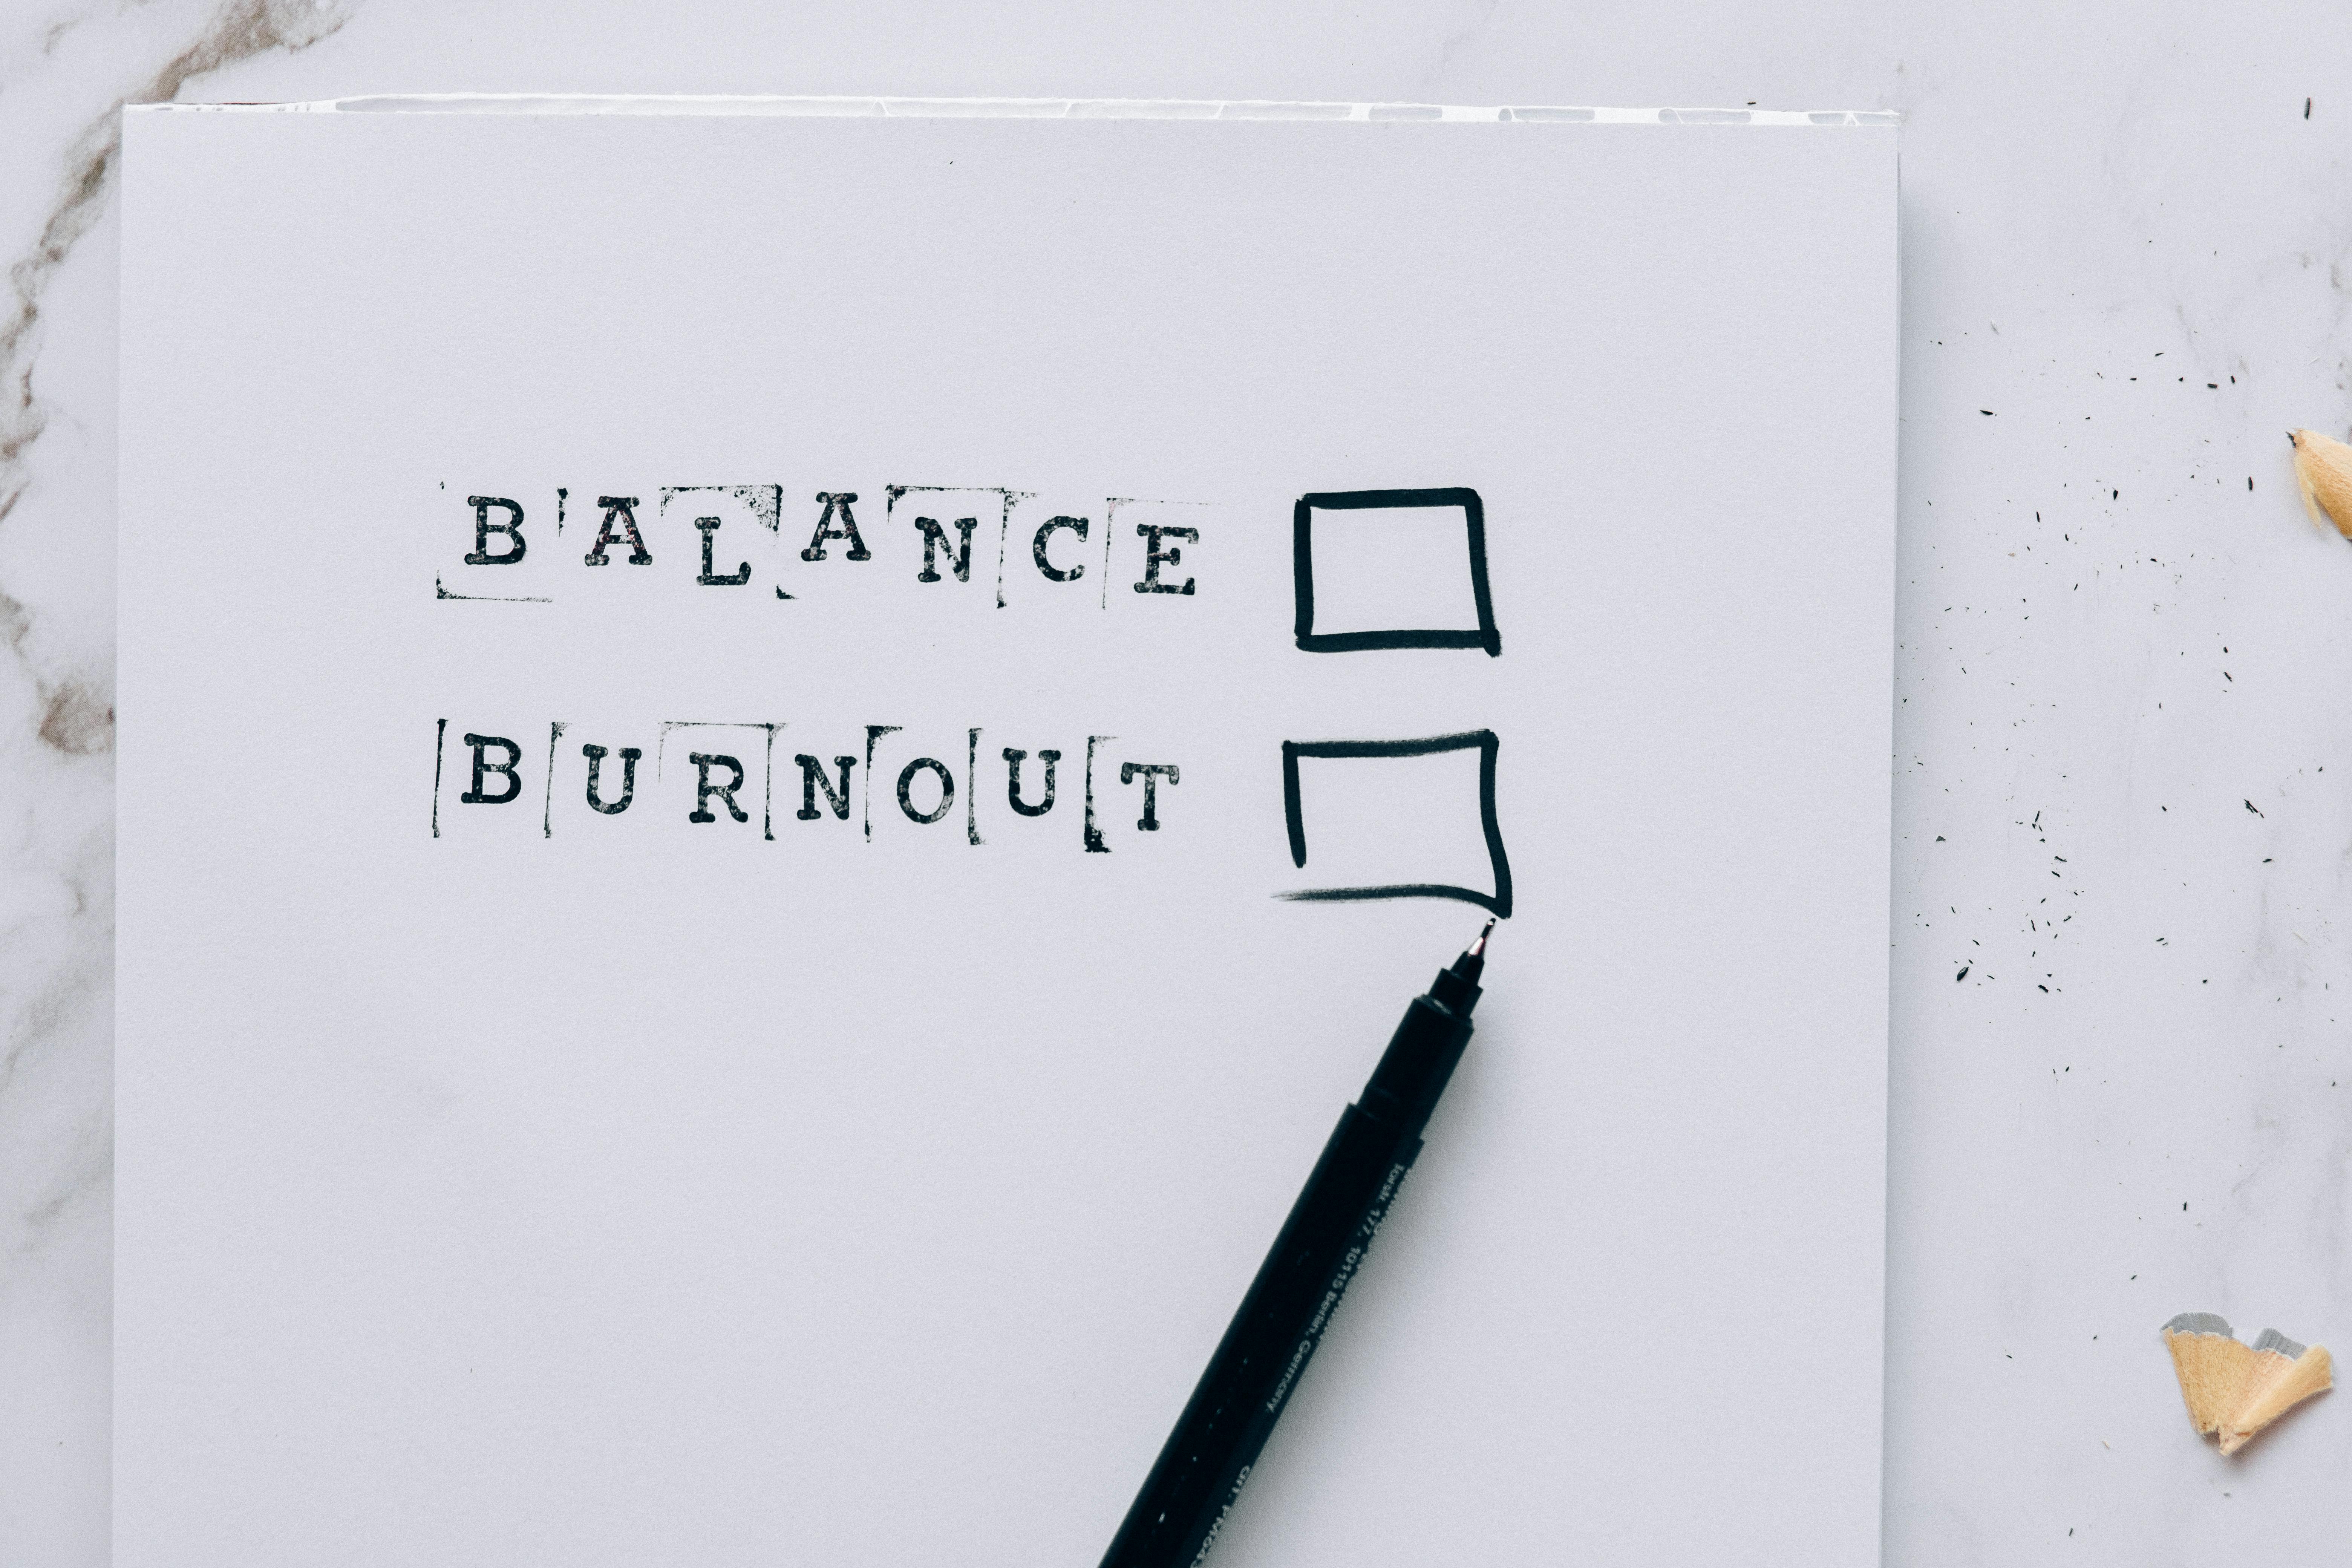 The words Balance and Burnout with check boxes and a pen